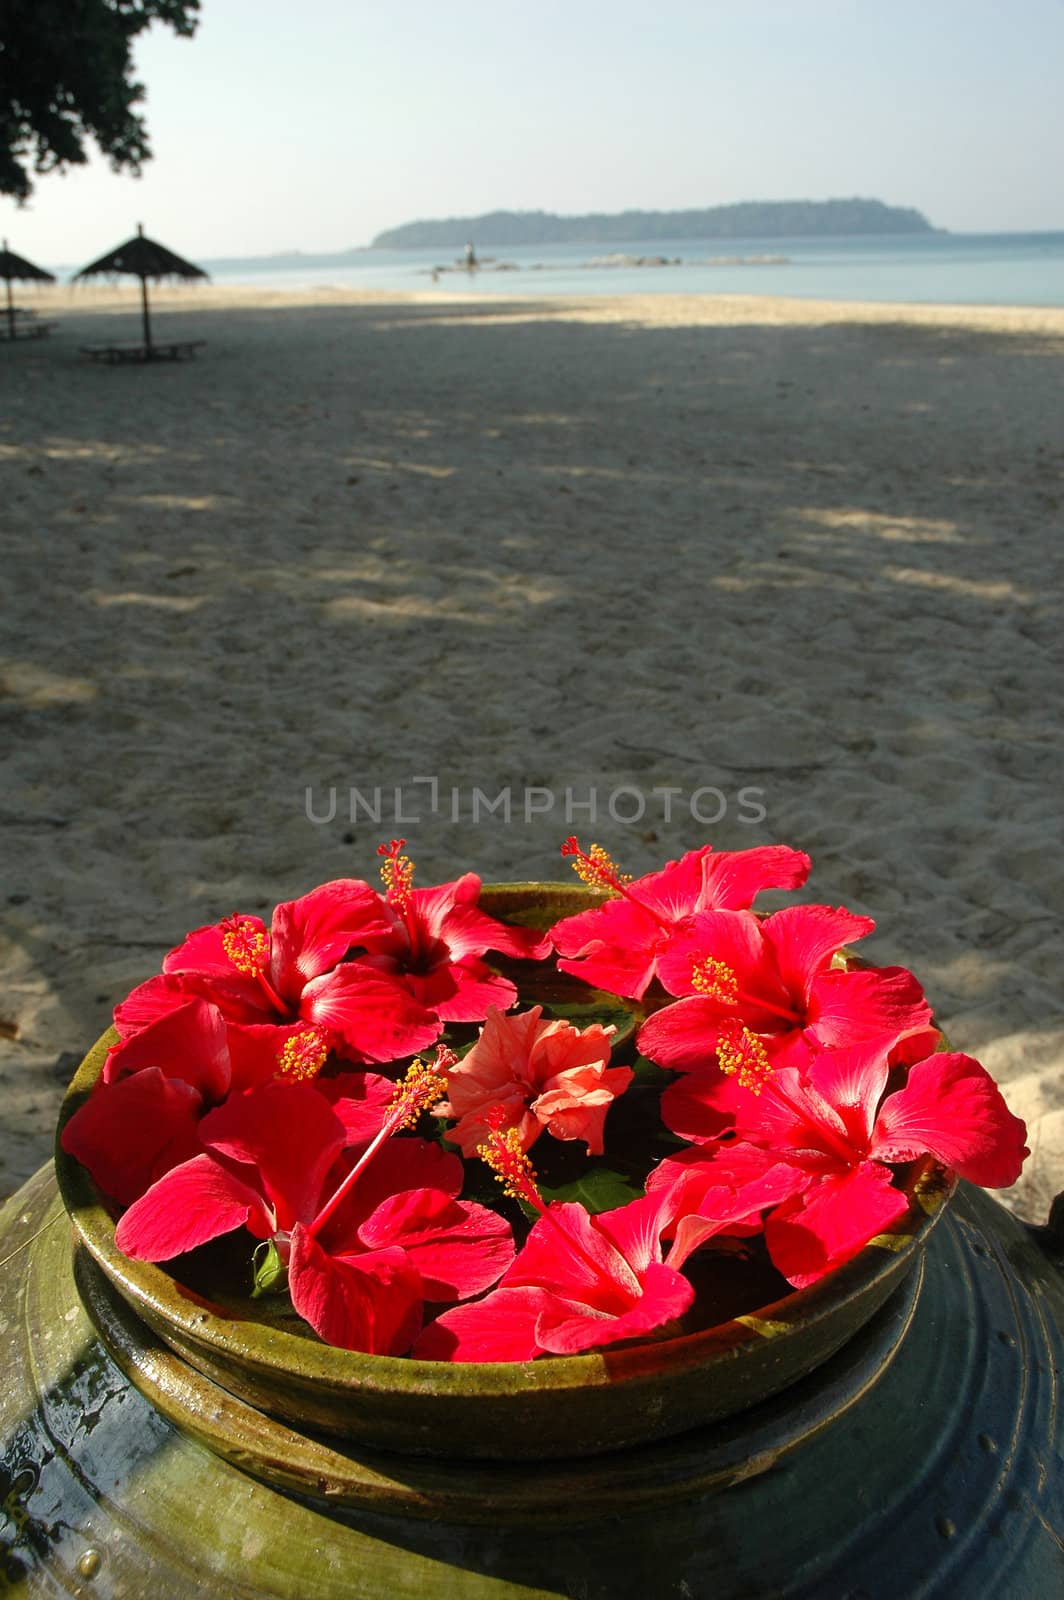 Red full bloom Malvaceae Hibiscus Flowers decoration on a beach